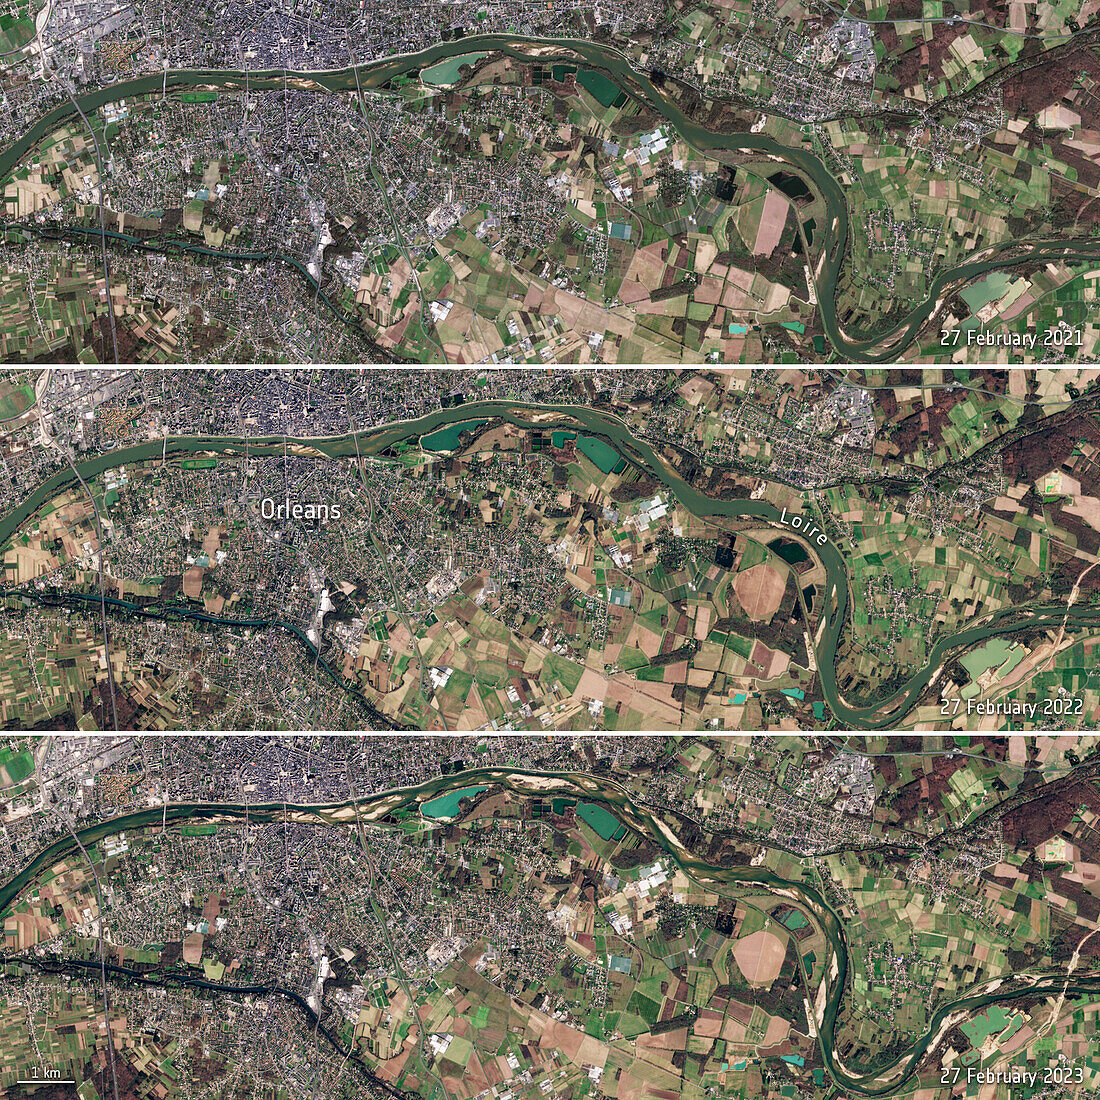 Loire River, France, over three years, satellite images